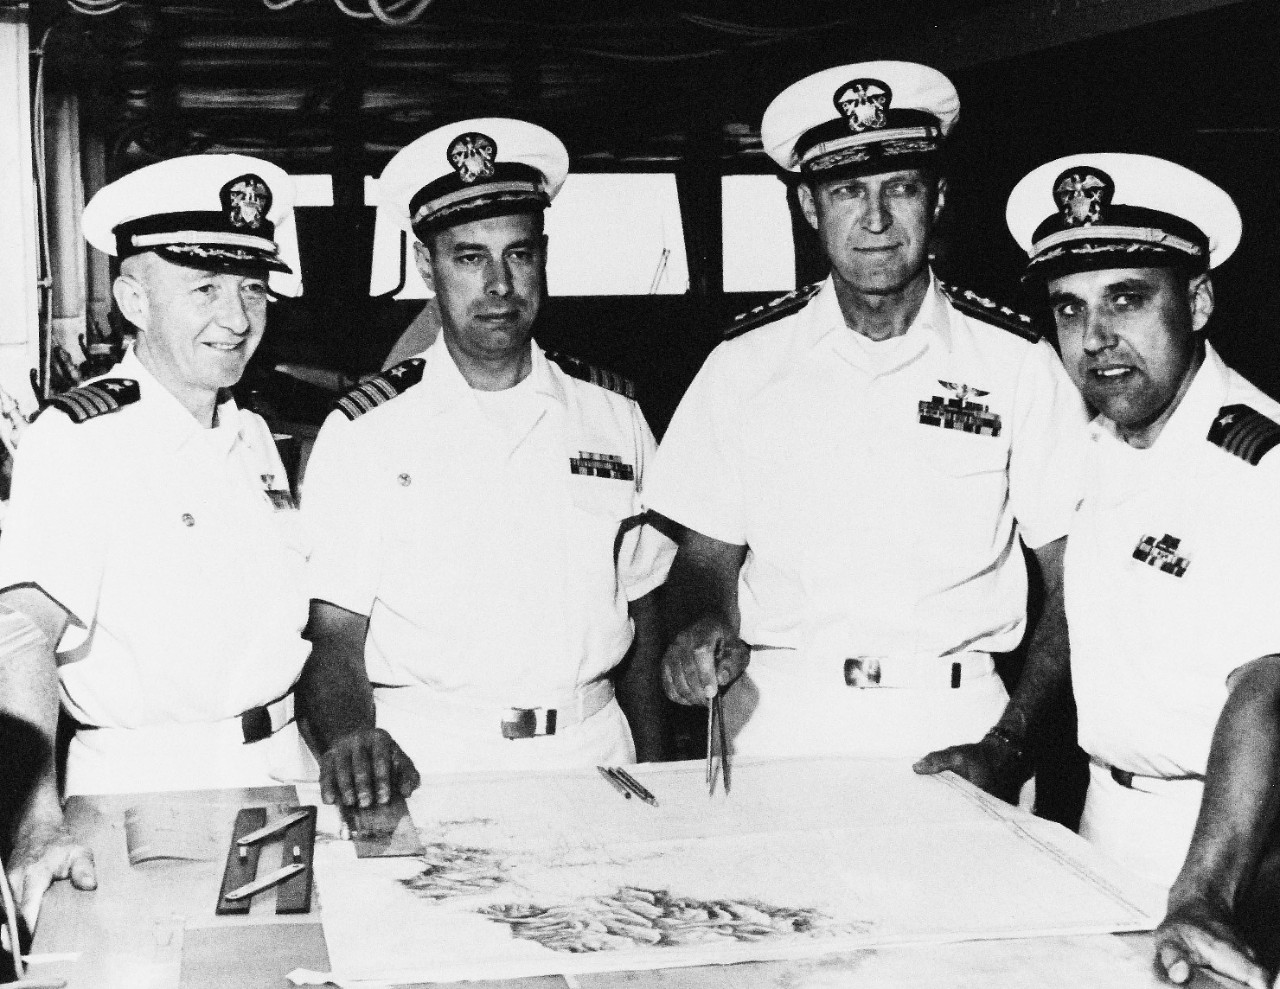 330-PSA-156-64 (USN 1103702):   Operation Sea Orbit, 1964.   A Ship Skippers Chart Course.  Commanding Officers of the nuclear powered USS Enterprise (CVN-65), USS Bainbridge (DLGN-25), USS Long Beach (CGN-9), confer with the commander of the world’s first Nuclear Task Group concerning the operations of the three ships.  Meeting on the bridge of the flagship Enterprise are, (left to right): Captain Frederick H. Michaelis (Enterprise); Captain Frank H. Price, Jr., (Long Beach); Rear Admiral Bernard M. Stream (Commander Nuclear Task Group 60.1) and Captain Raymond E. Peet (Bainbridge).   Photograph released July 24, 1964.  Official U.S. Navy Photograph, now in the collections of the National Archives.   (2015/11/03).